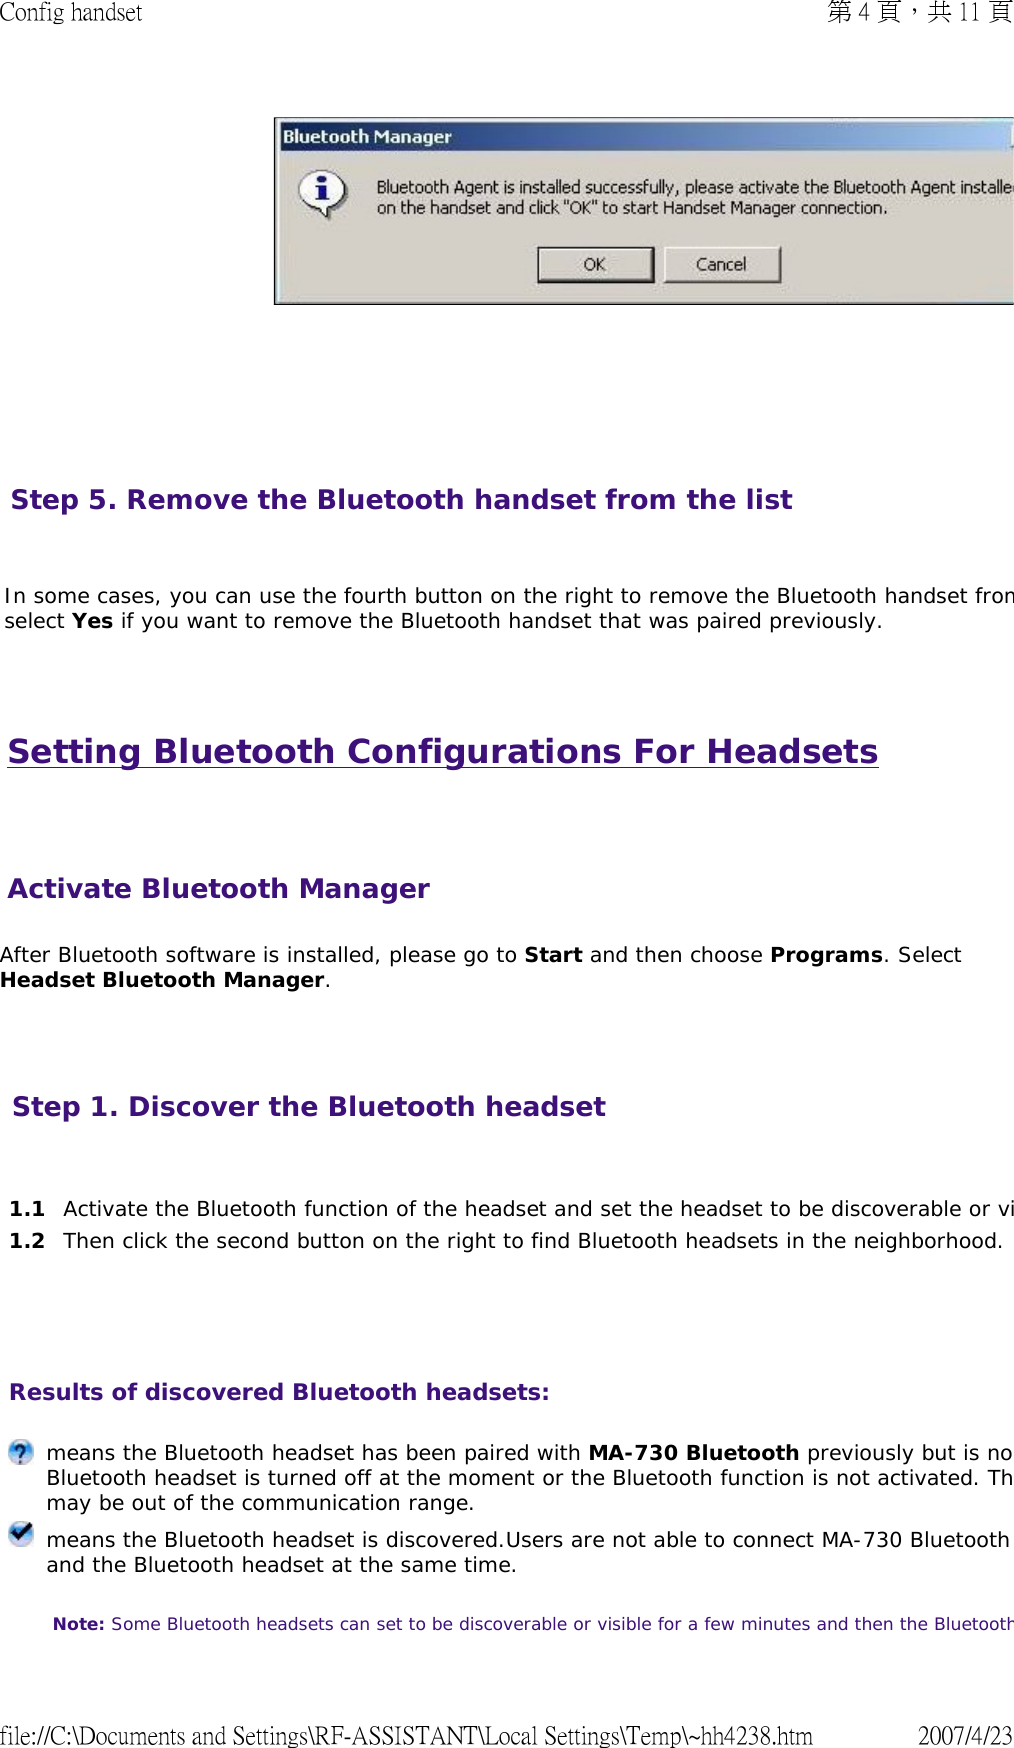 Setting Bluetooth Configurations For Headsets   After Bluetooth software is installed, please go to Start and then choose Programs. Select Headset Bluetooth Manager.         Step 5. Remove the Bluetooth handset from the list   In some cases, you can use the fourth button on the right to remove the Bluetooth handset fromselect Yes if you want to remove the Bluetooth handset that was paired previously.    Activate Bluetooth ManagerStep 1. Discover the Bluetooth headset       1.1 Activate the Bluetooth function of the headset and set the headset to be discoverable or vi1.2 Then click the second button on the right to find Bluetooth headsets in the neighborhood.Results of discovered Bluetooth headsets:  means the Bluetooth headset has been paired with MA-730 Bluetooth previously but is noBluetooth headset is turned off at the moment or the Bluetooth function is not activated. Thmay be out of the communication range. means the Bluetooth headset is discovered.Users are not able to connect MA-730 Bluetooth and the Bluetooth headset at the same time.  Note: Some Bluetooth headsets can set to be discoverable or visible for a few minutes and then the Bluetooth第 4 頁，共 11 頁Config handset2007/4/23file://C:\Documents and Settings\RF-ASSISTANT\Local Settings\Temp\~hh4238.htm